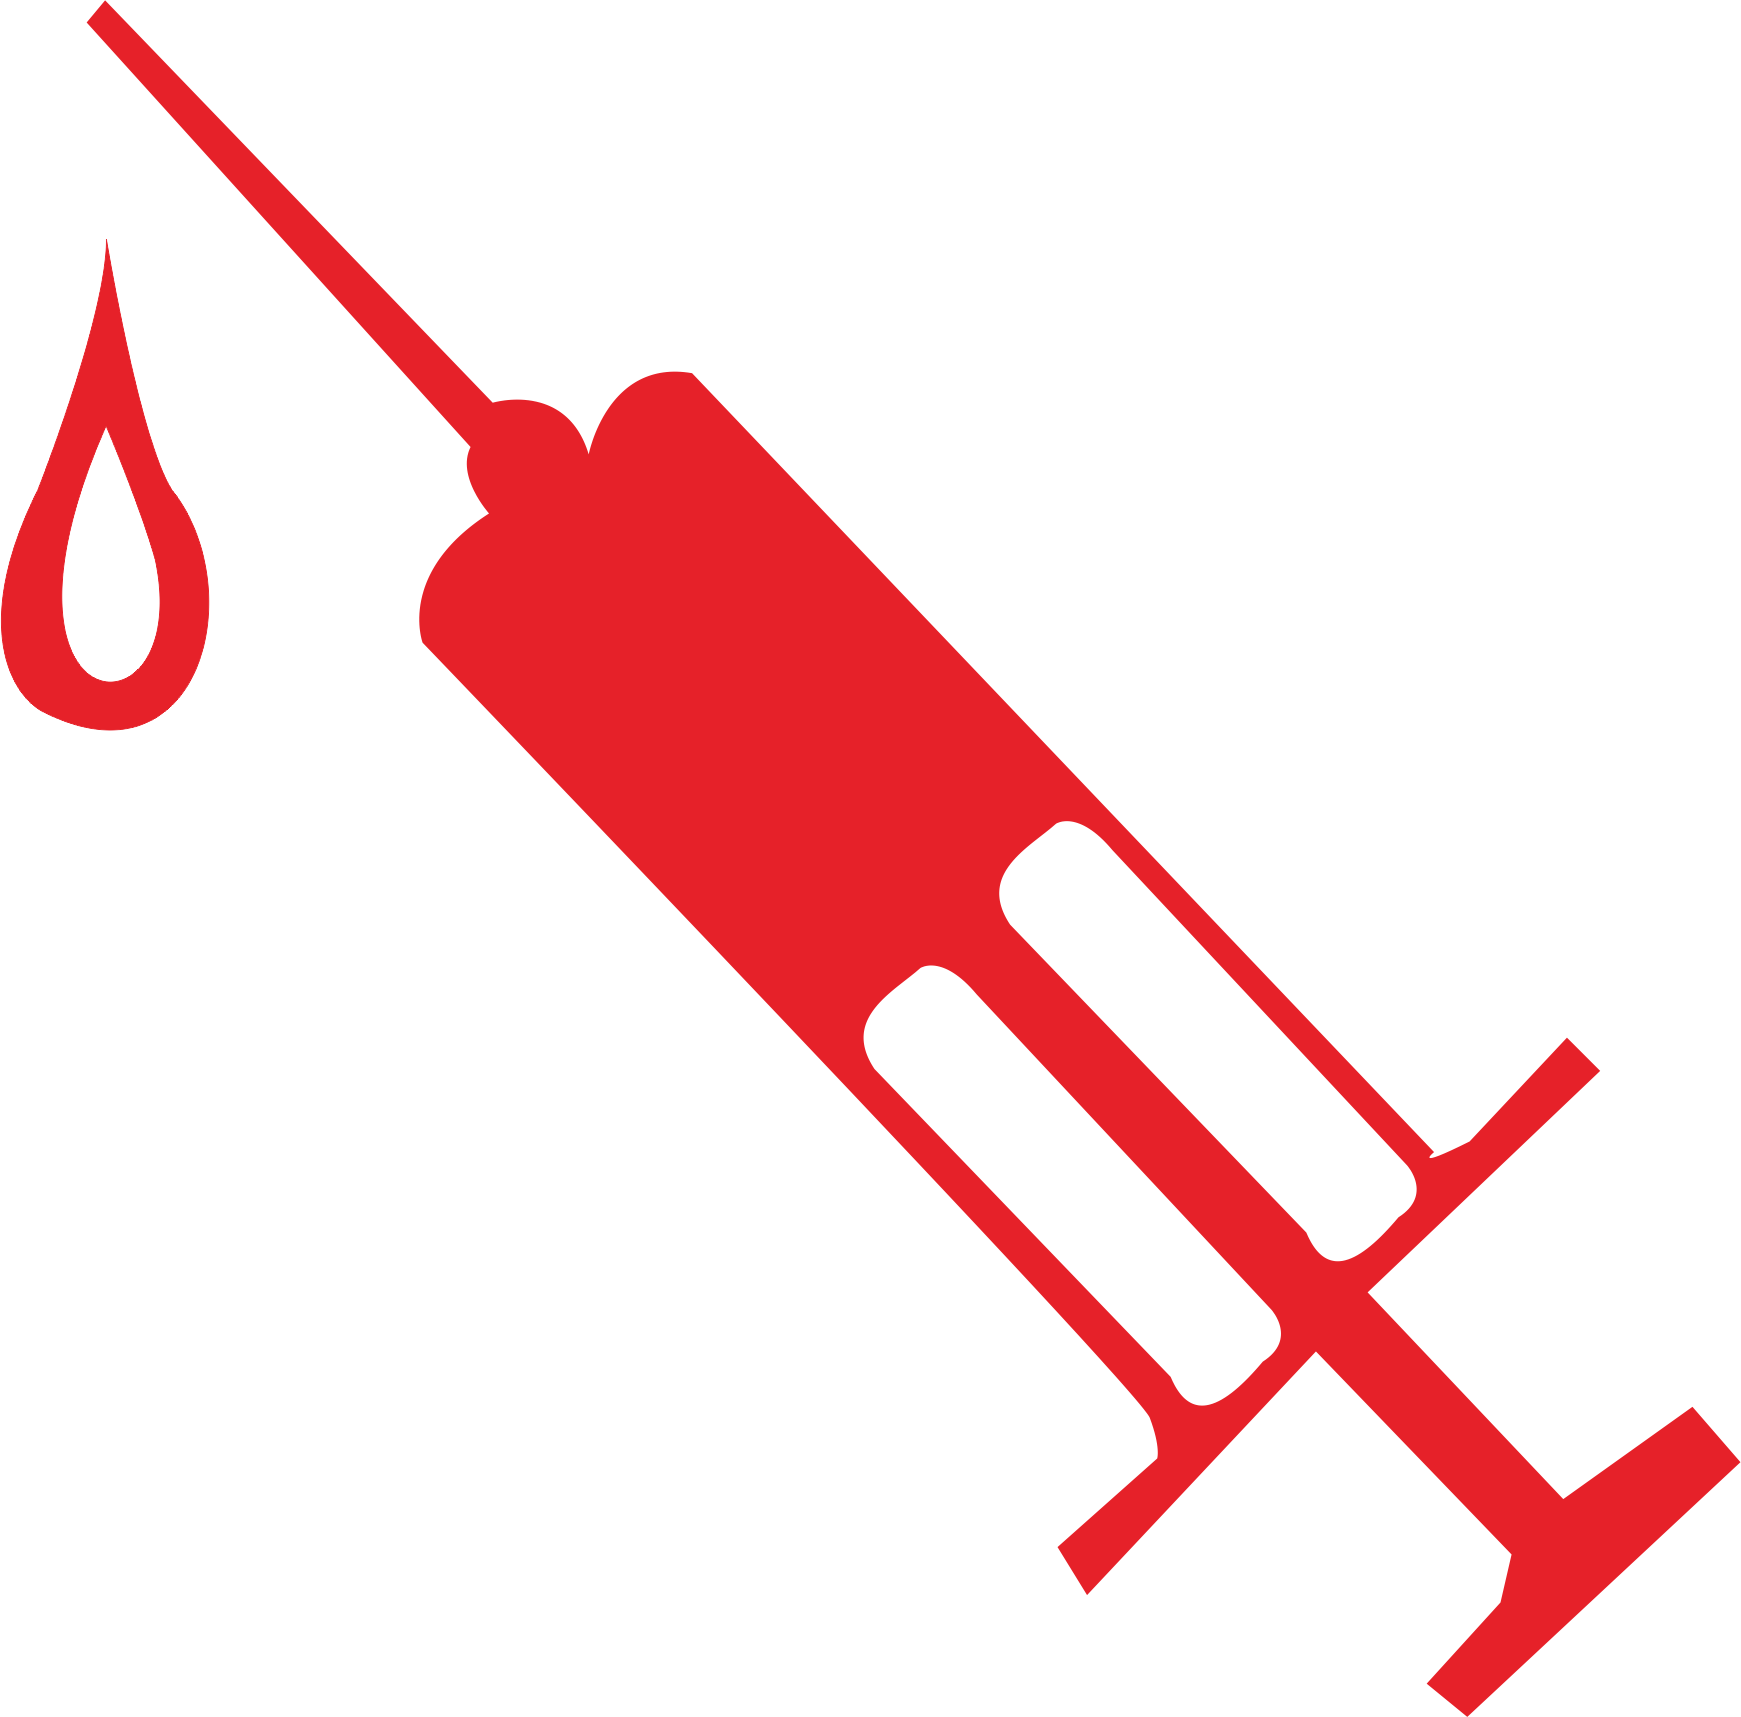 A Red Syringe With A Drop Of Blood